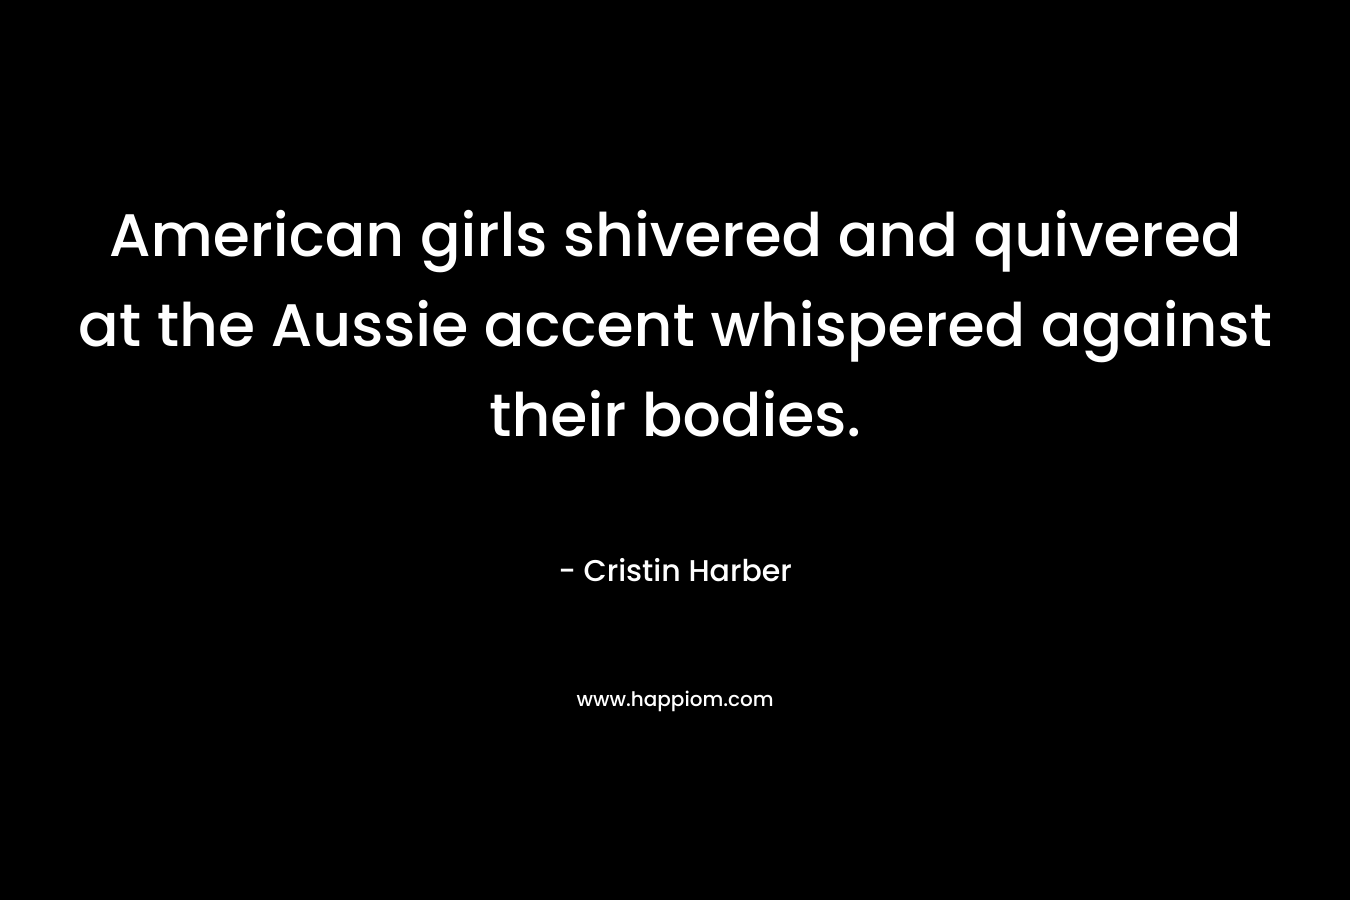 American girls shivered and quivered at the Aussie accent whispered against their bodies.